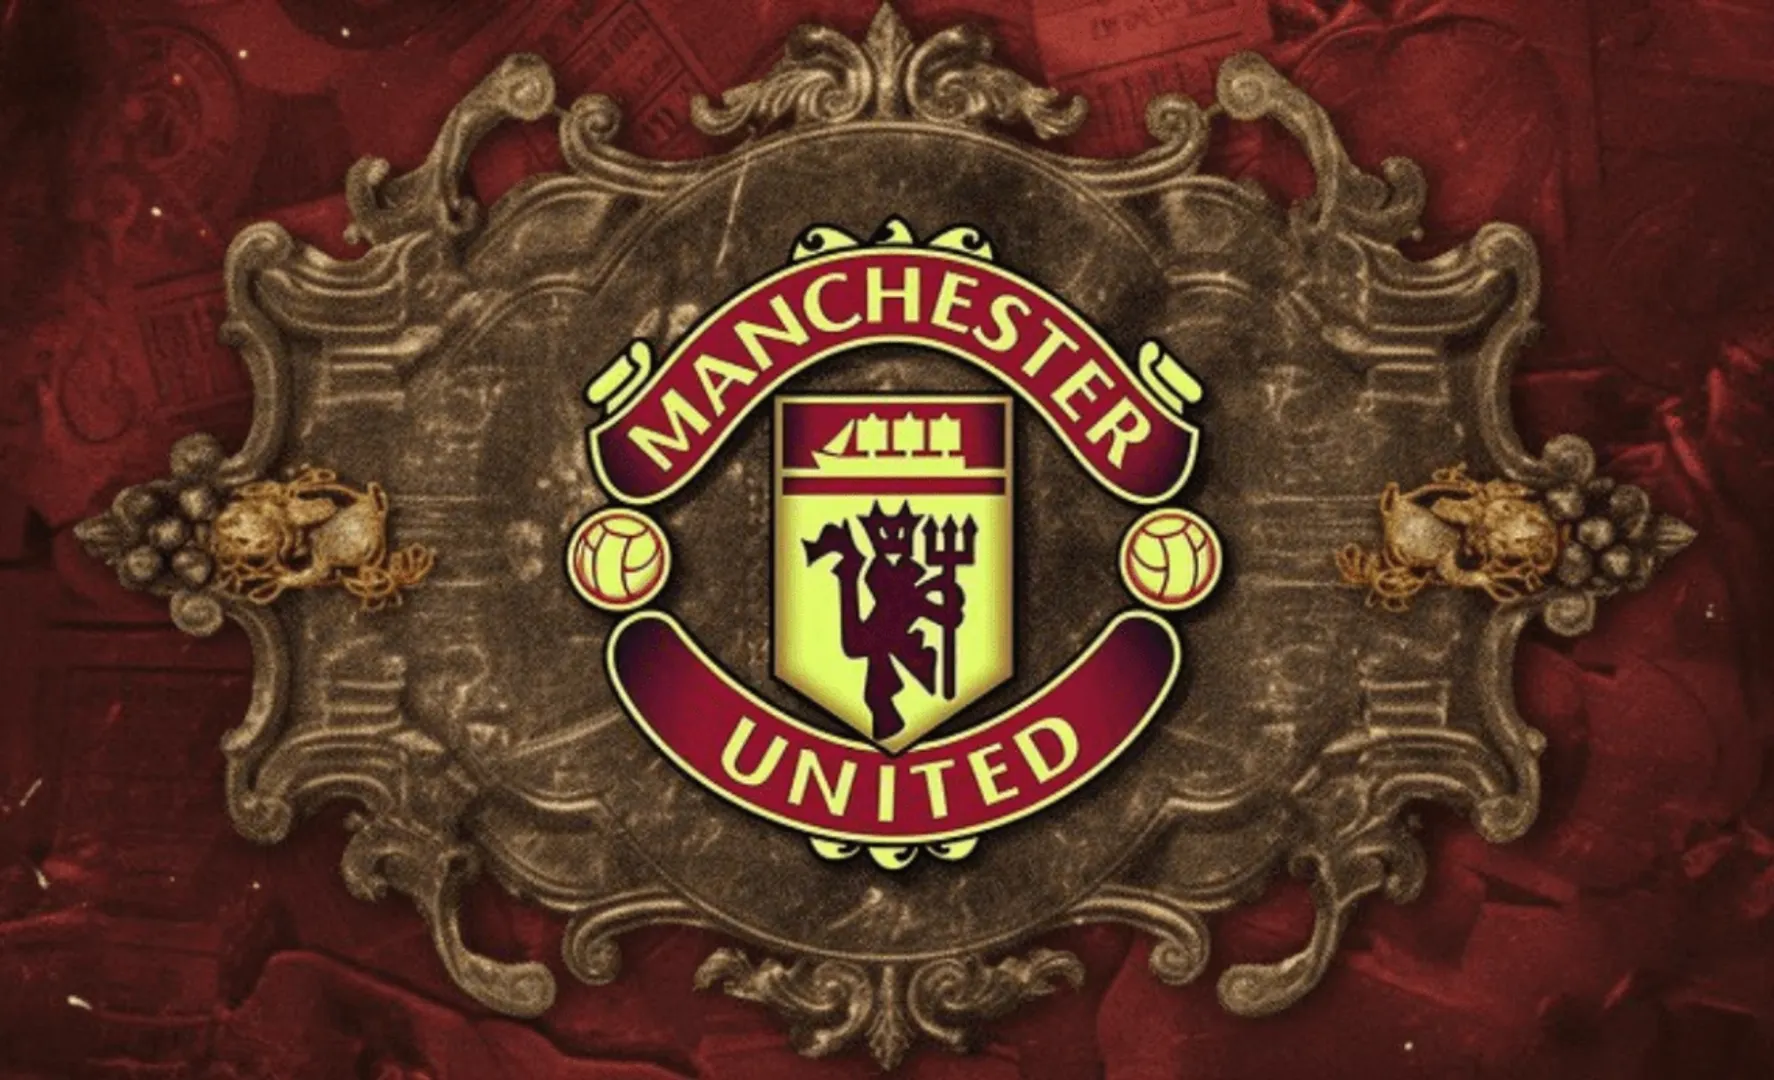 🚨Big news in the world of football!🚨

🔴Manchester United is the subject of a proposed buyout with four offers on the table.

💰 Ineos' Sir Jim Ratcliffe has tabled a full buyout proposal worth £5bn, the highest ever for a sports club.

🏦Qatar Islamic Bank has offered to buy shares amounting to over 30% of the club, making them the largest shareholder.

🤝The Carlyle Group, Elliott Management, Ares Management Corporation, and Sixth Street have also tabled bids for minority stakes or financing investment in the club.

🌟This proposed deal is set to become the largest in the history of sports club acquisitions, highlighting the magnitude of Manchester United as a brand and a football club.

⚽Exciting times lie ahead for Manchester United and their fans as a change in ownership may alter the direction of the club.

Full article 👉  https://webthat.io/exploring-the-proposed-buyout-of-manchester-united-a-comprehensive-analysis/